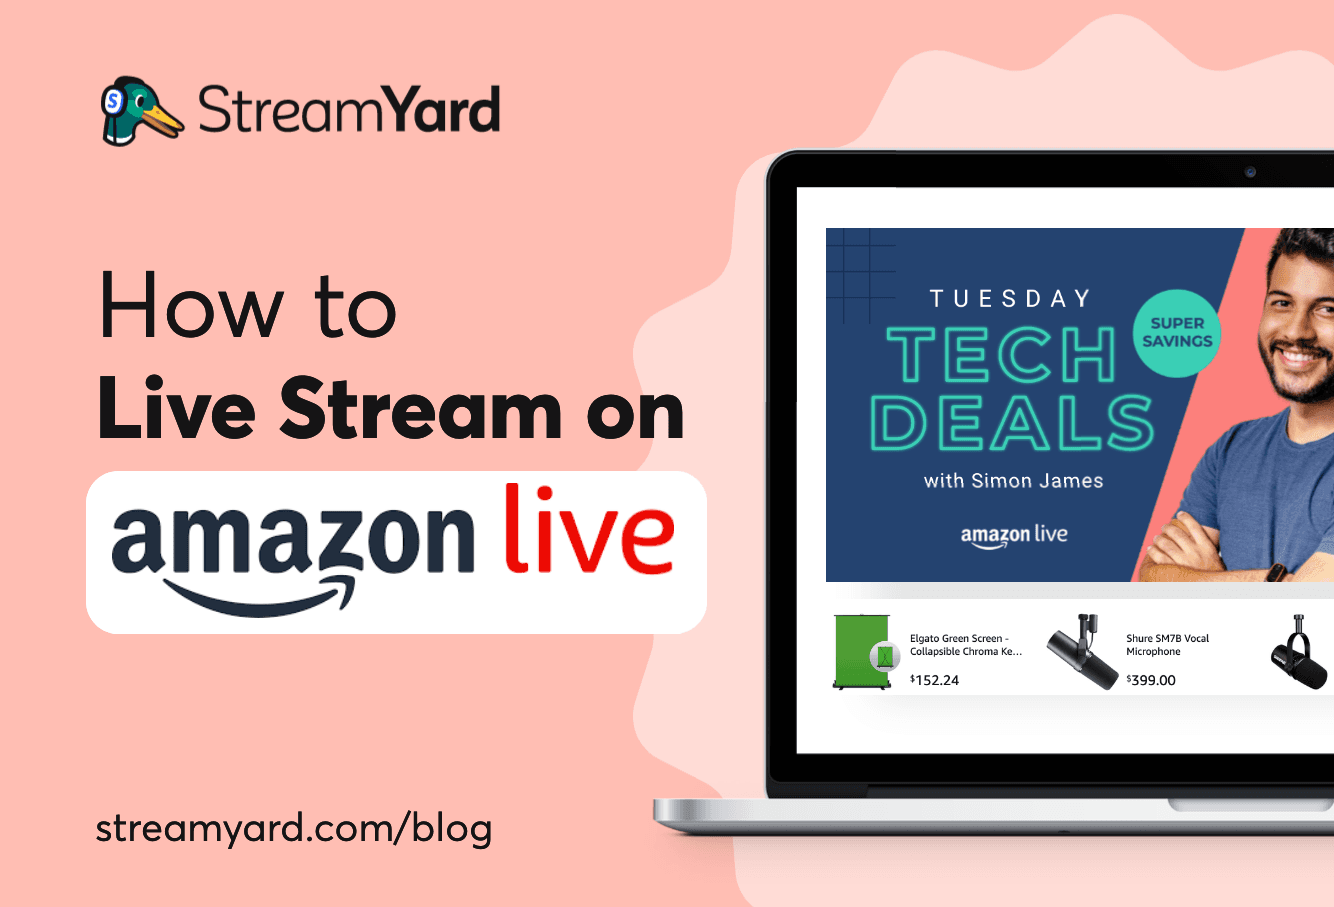 Find out how to use Amazon Live with StreamYard and leverage live shopping